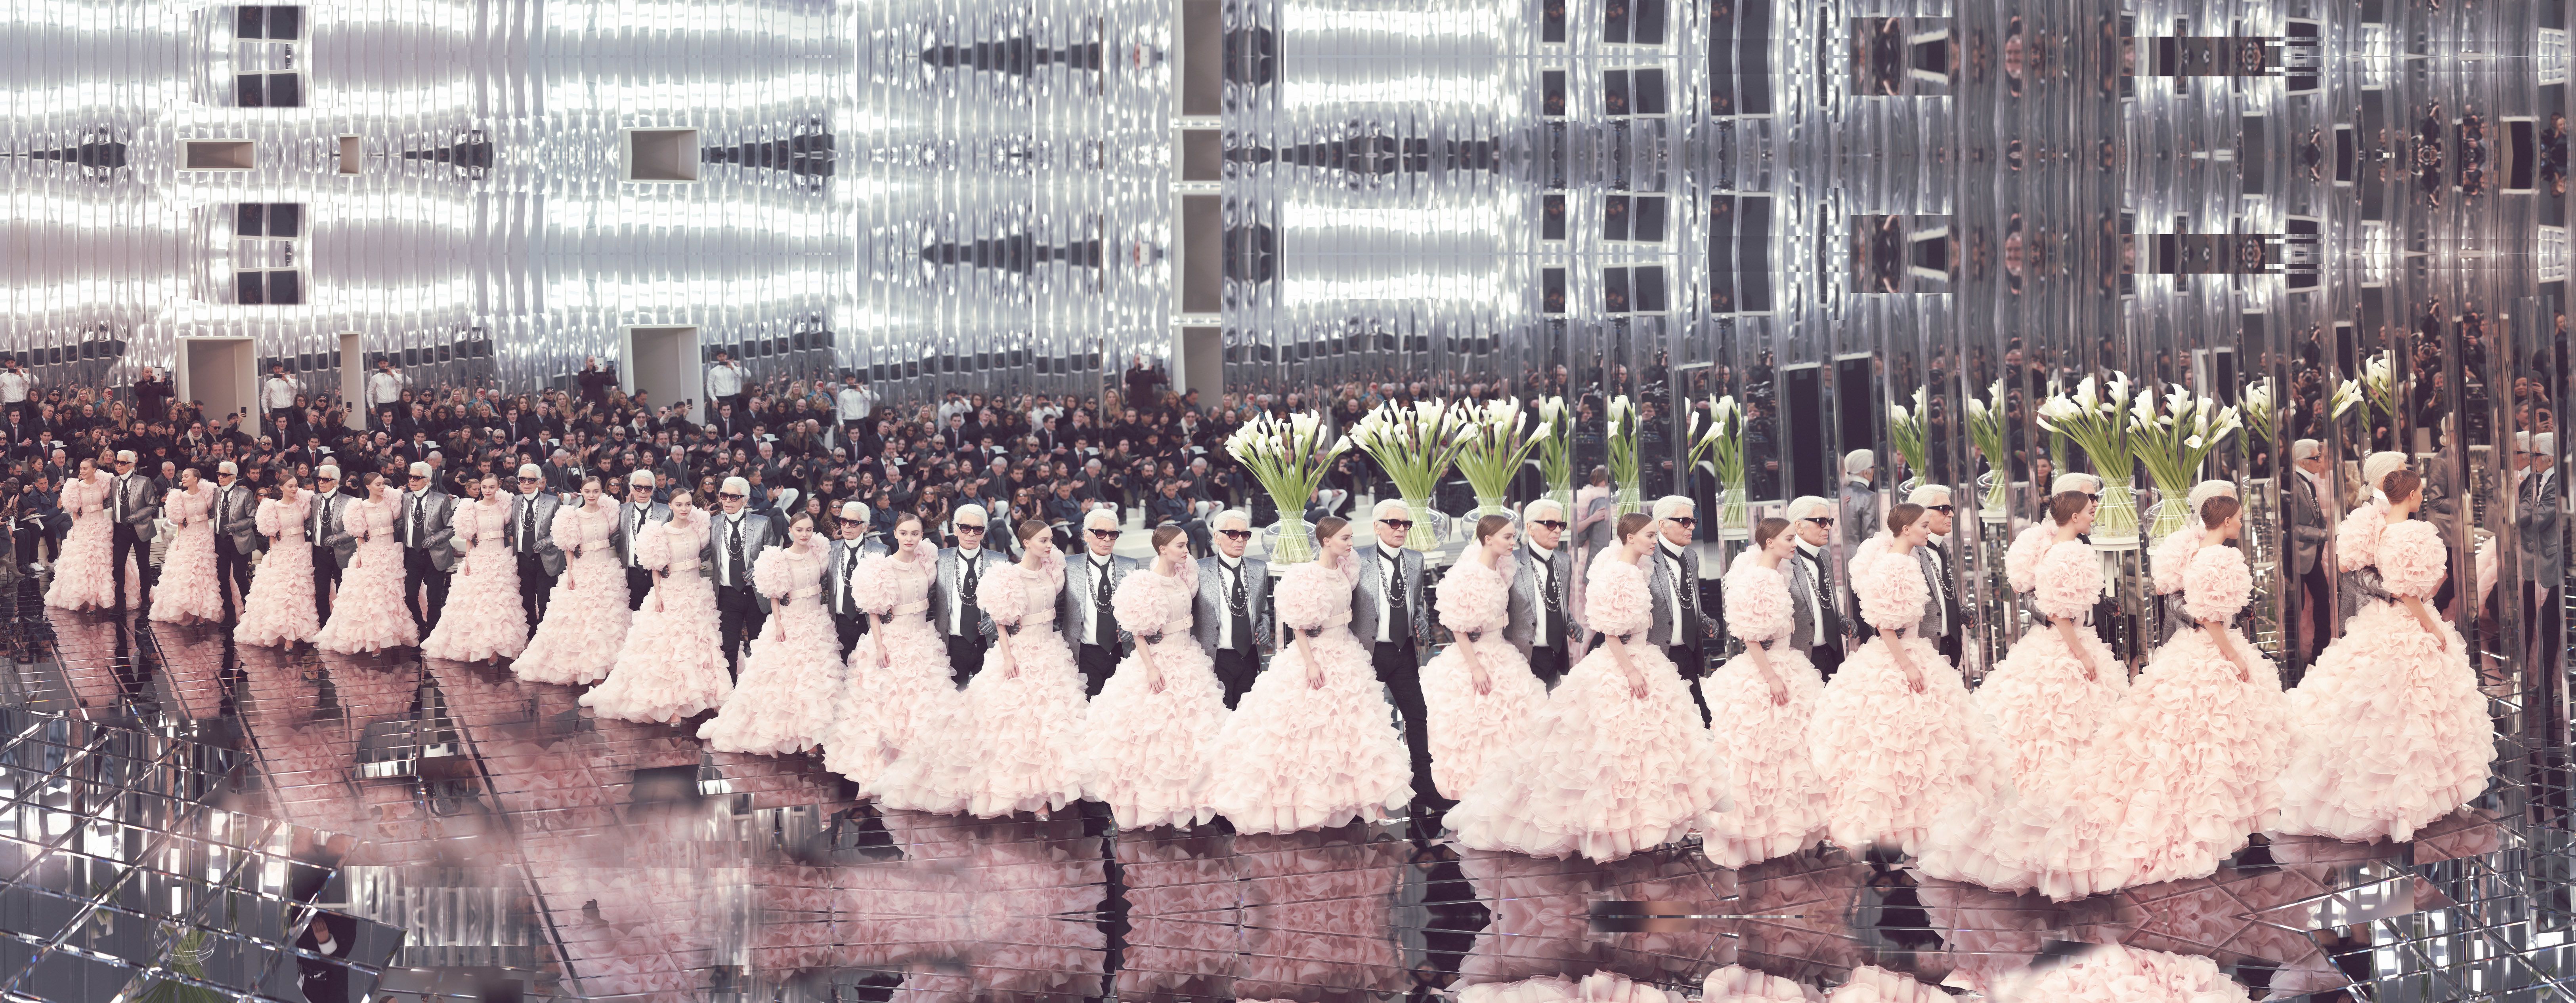 Karl Lagerfeld's Most Spectacular Chanel Show Sets